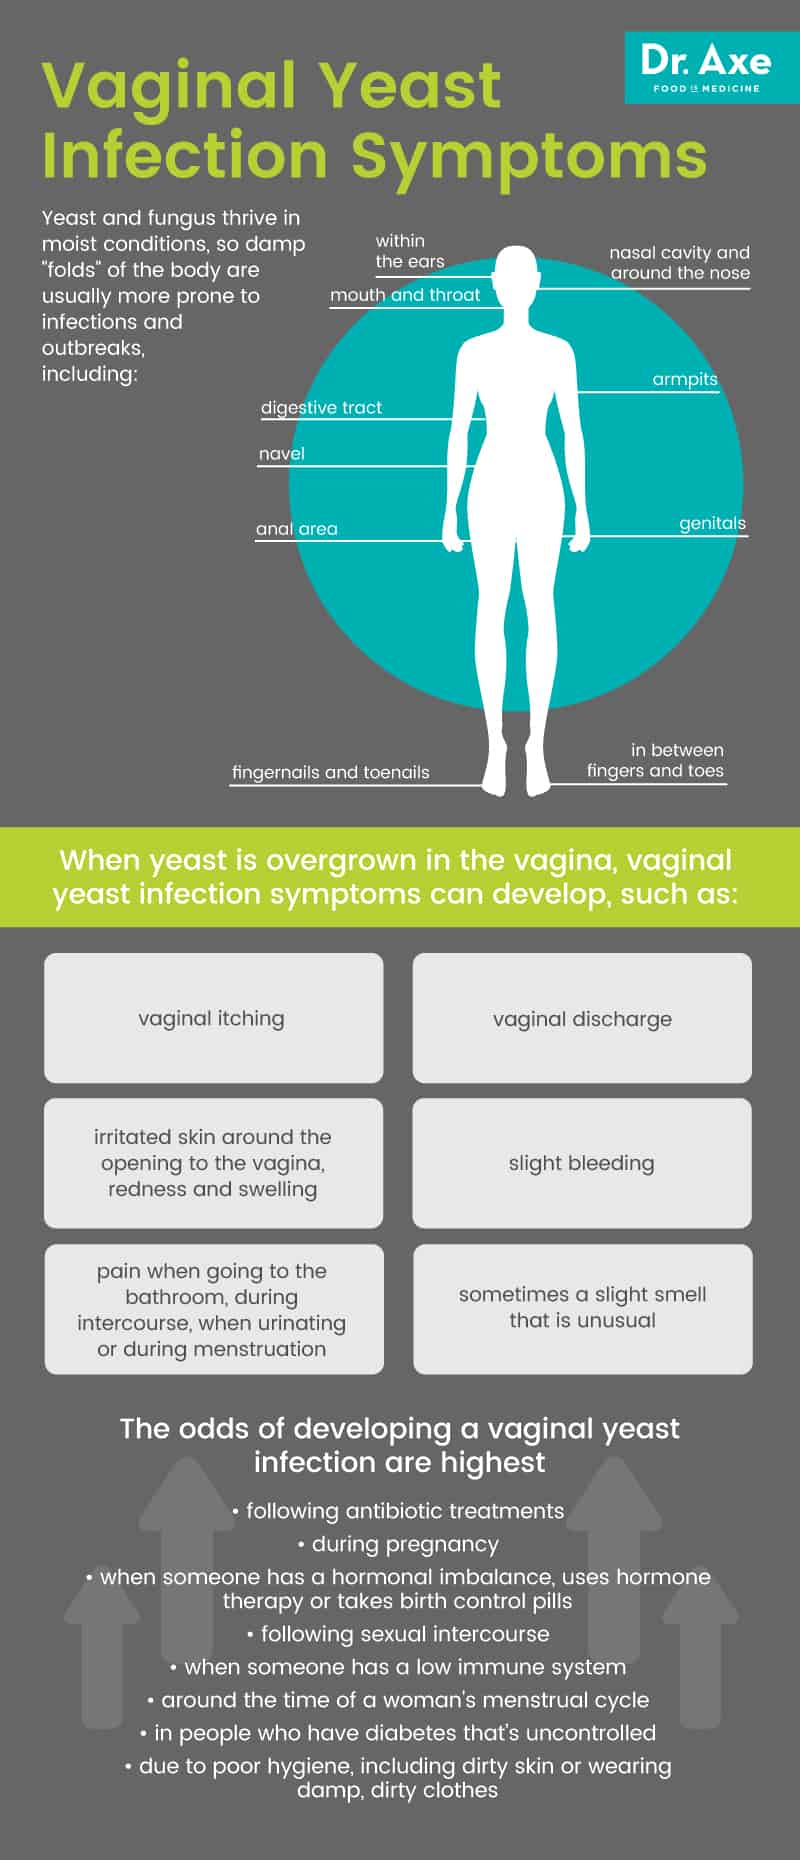 Vaginal yeast infection symptoms - Dr. Axe